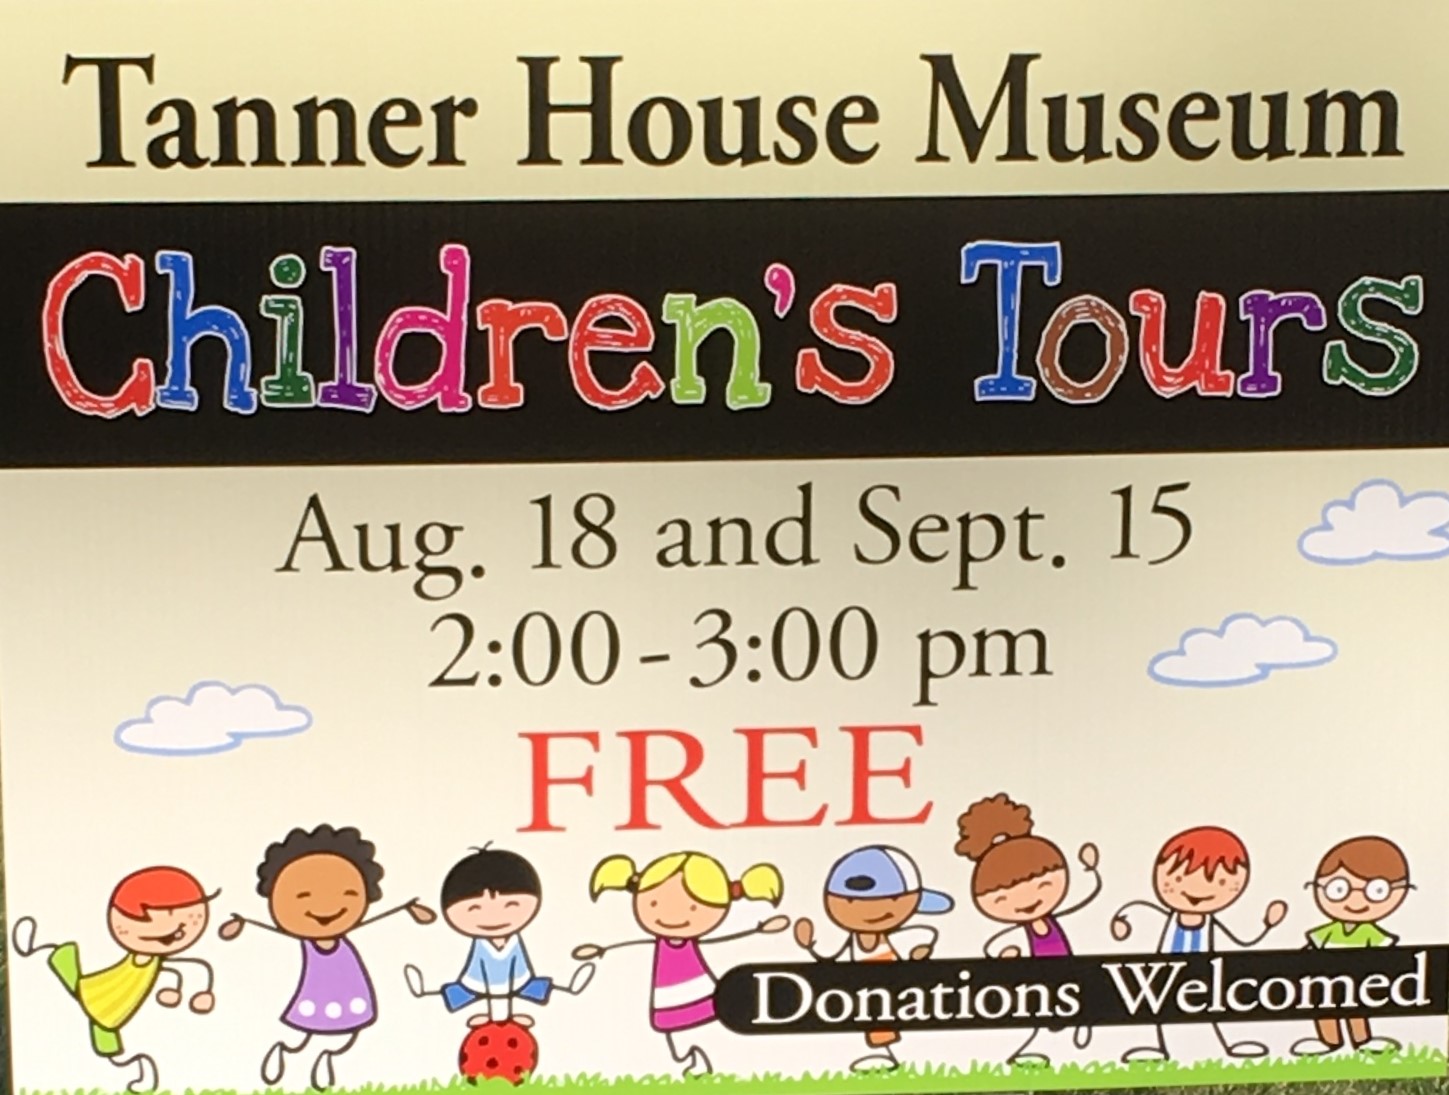 Focus on children at new Tanner House Museum tours